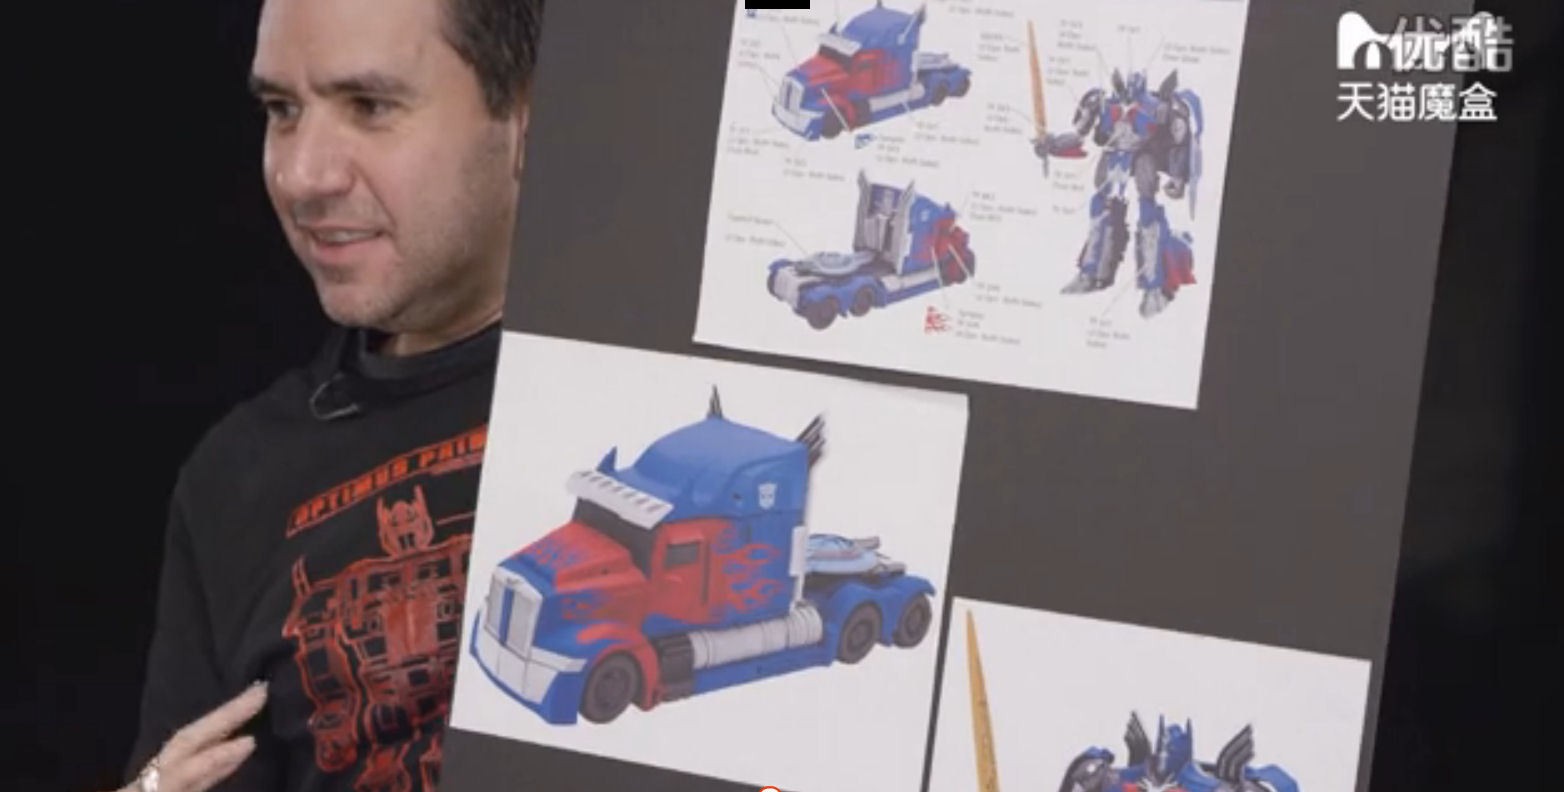 Transformers News: More Images of Transformers: The Last Knight Optimus Prime Toy, with John Warden